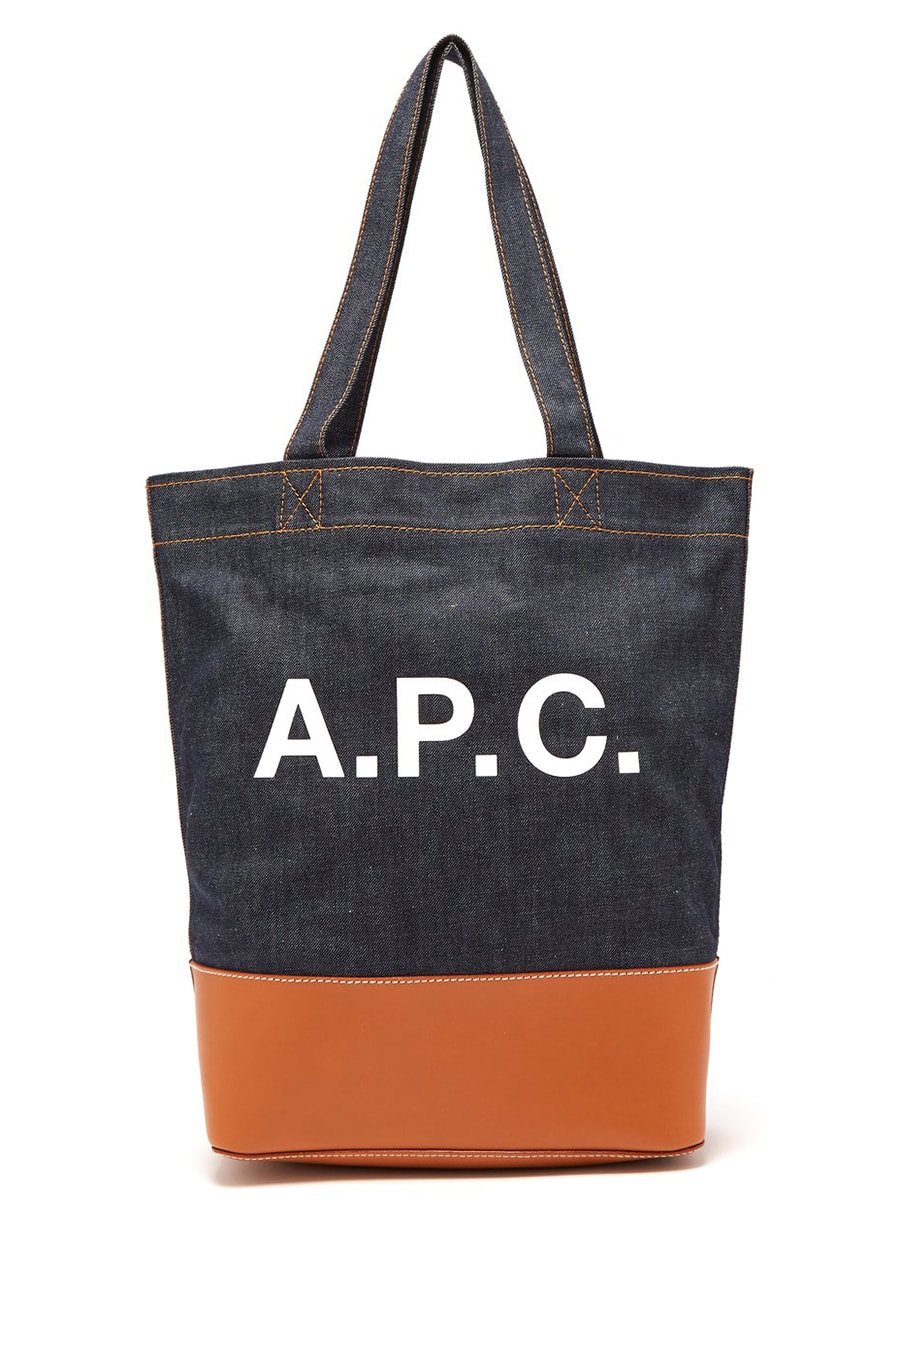 A.P.C. Unveils a Set of Axel Tote Bags | Hypebeast